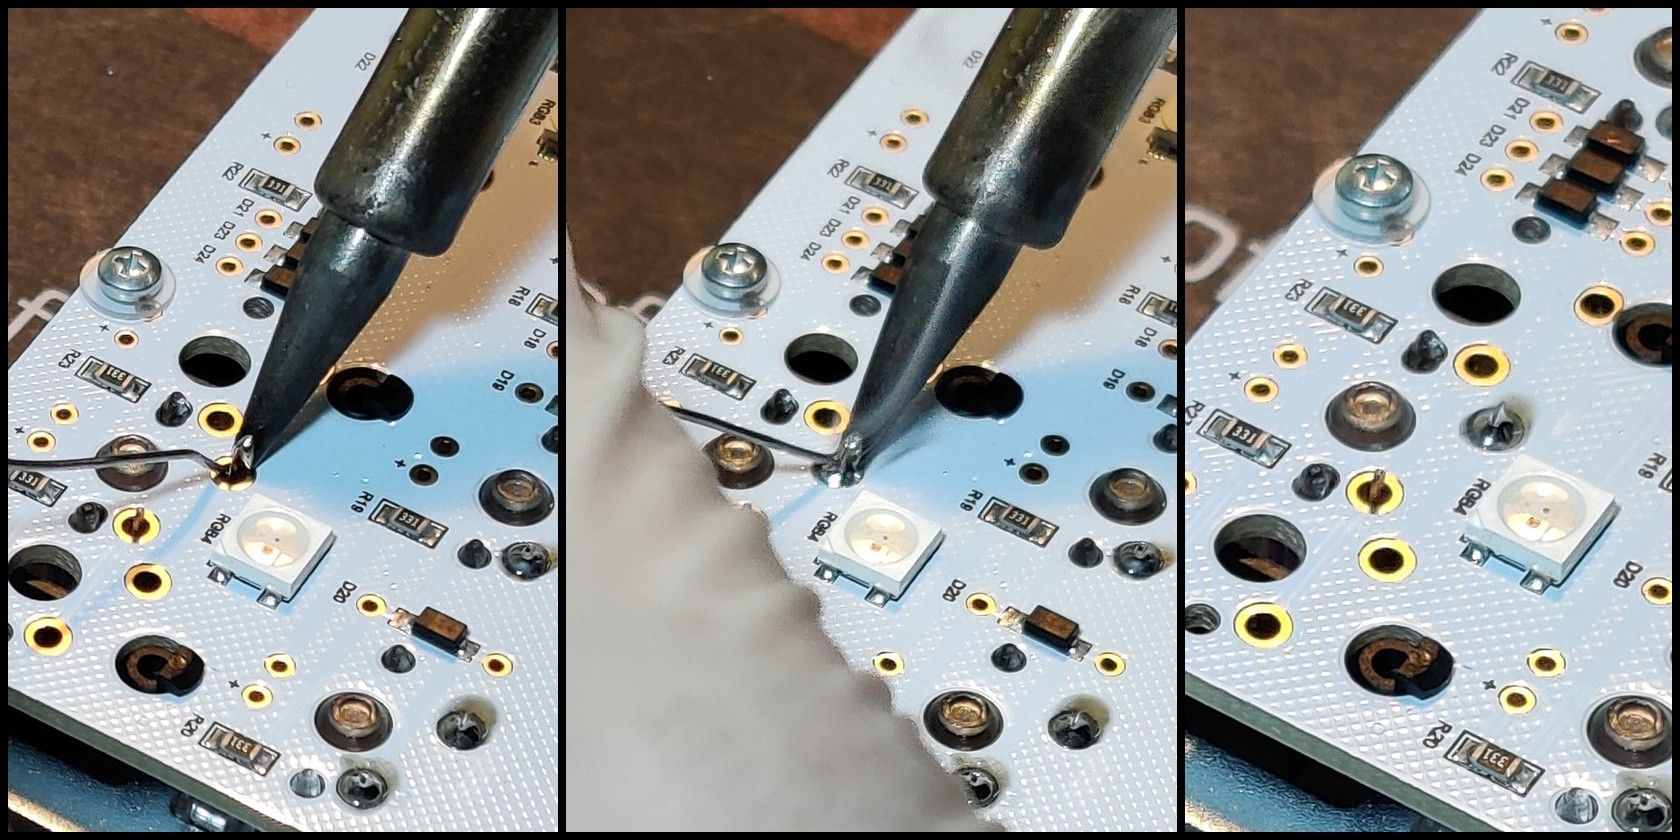 Three stages of achieving a successful soldered joint.